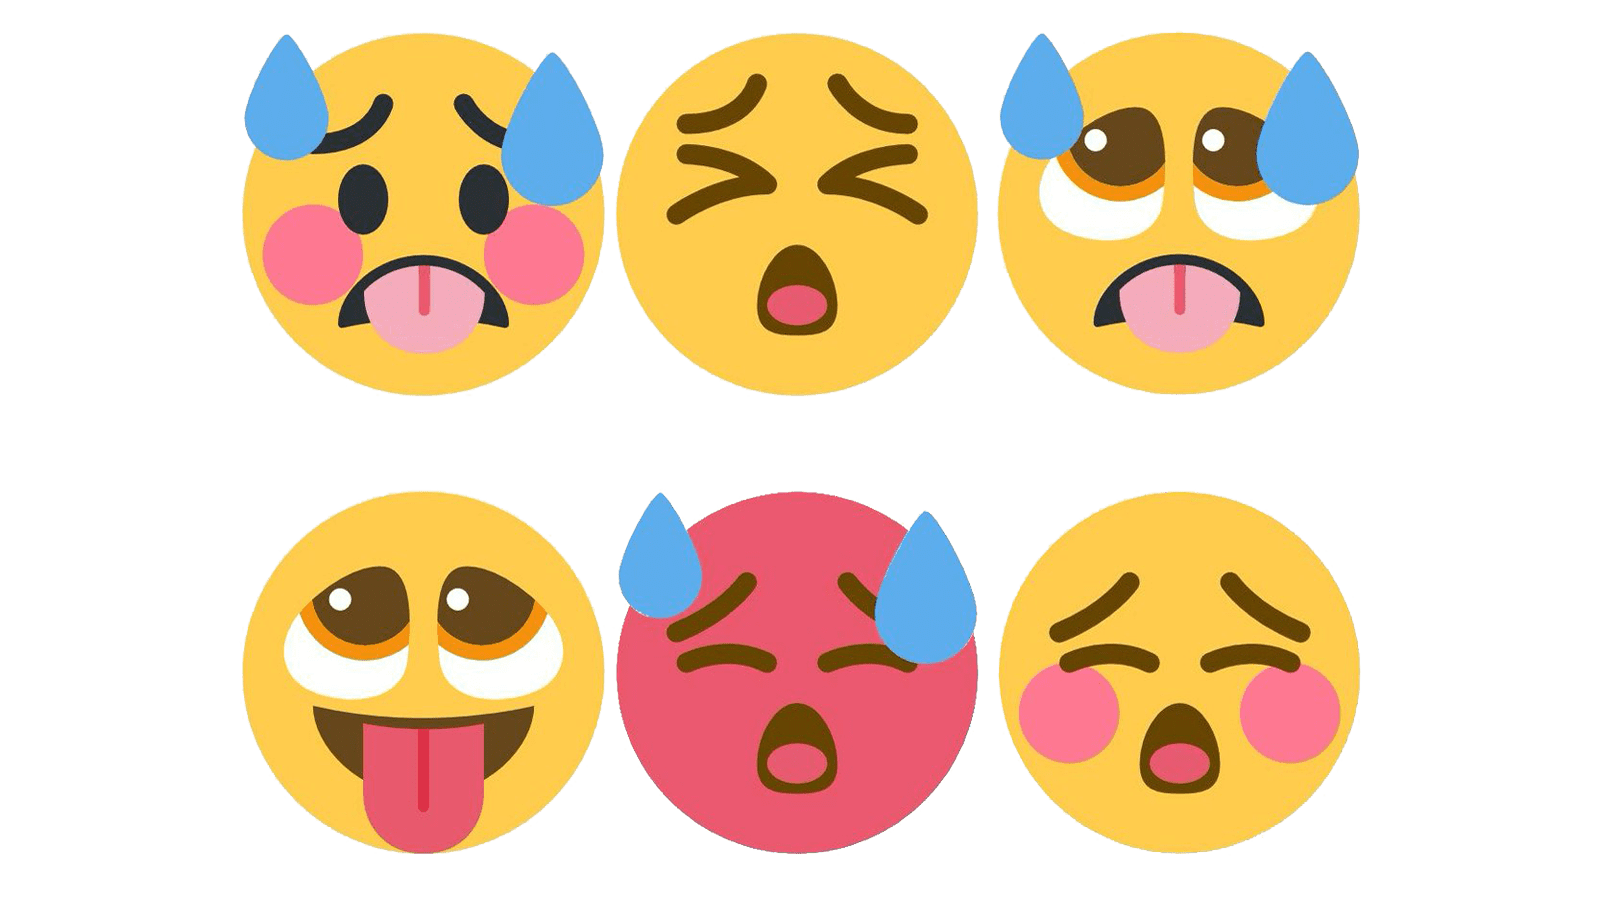 charles ranney recommends ahegao face emoji pic